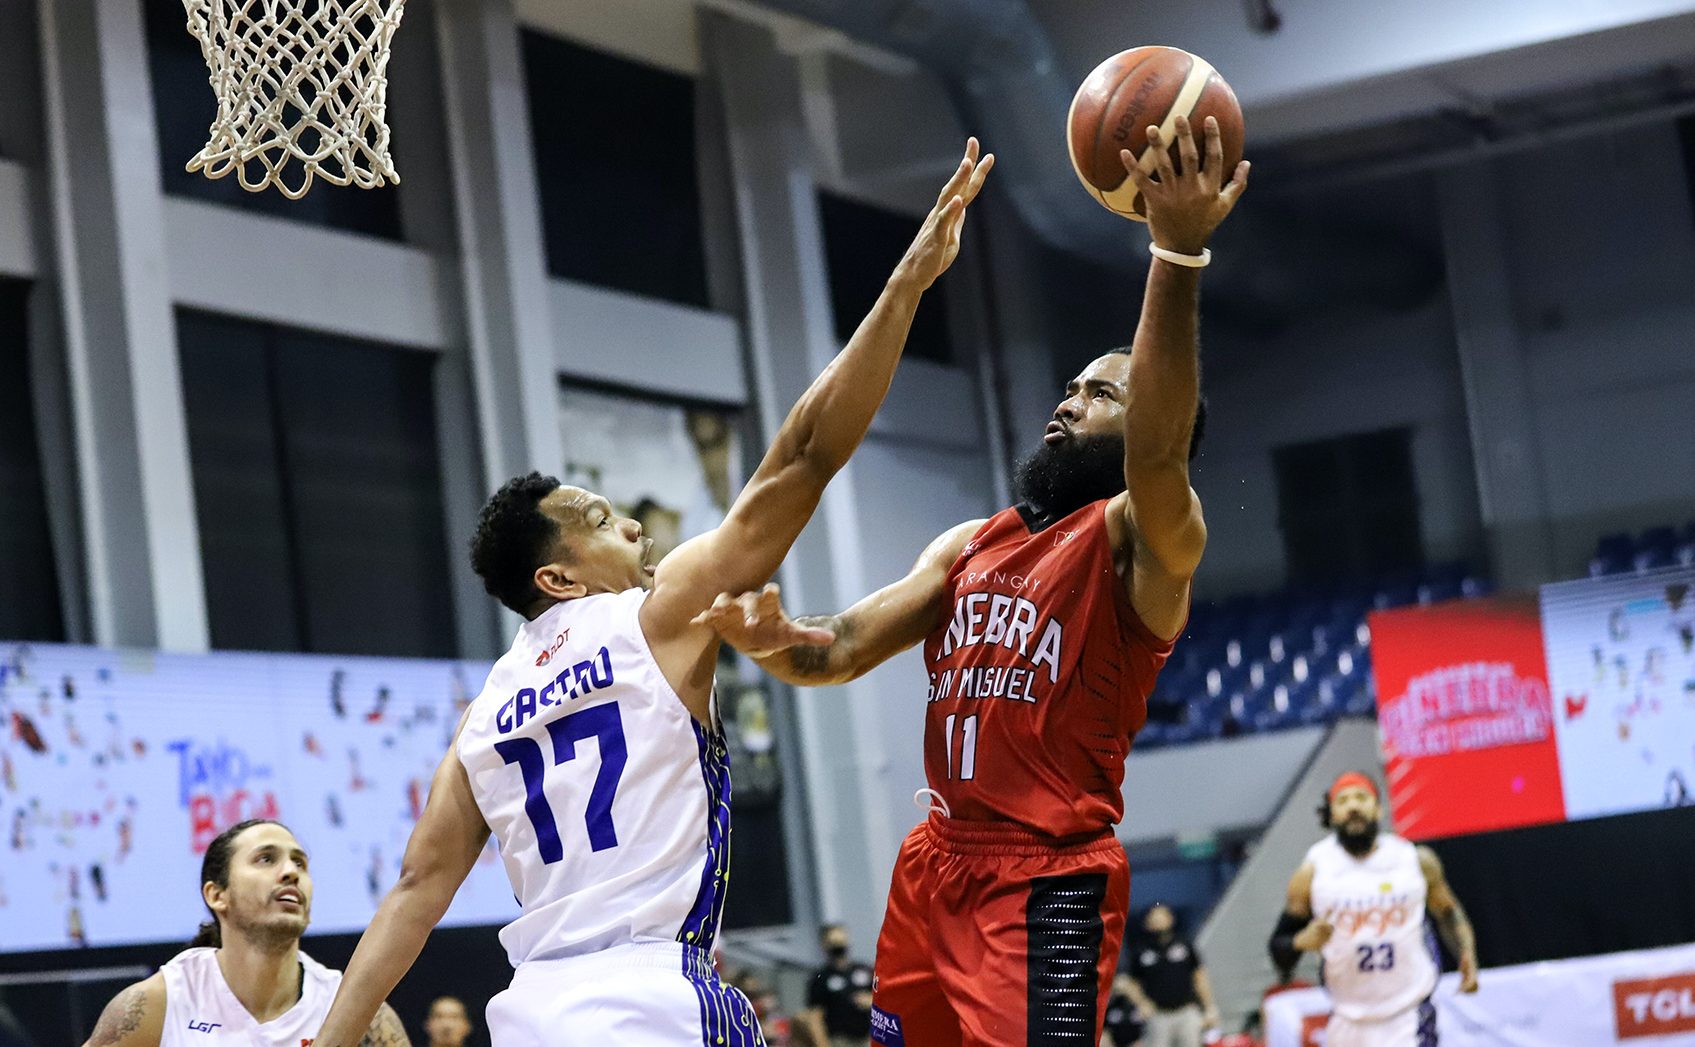 Stanley Pringle bags first PBA Best Player honors